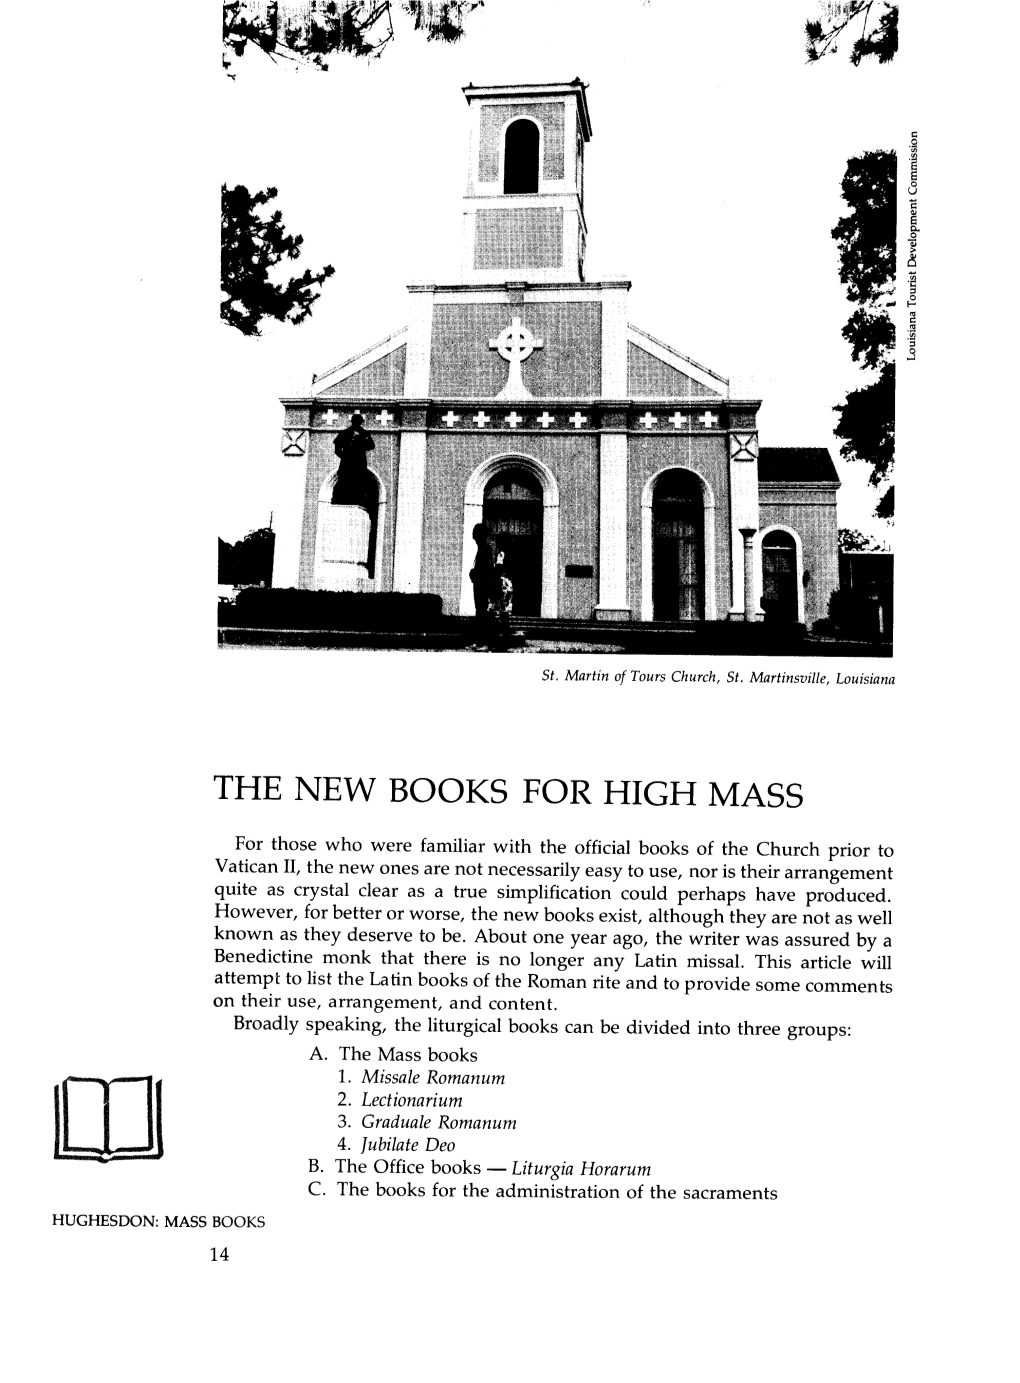 The New Books for High Mass